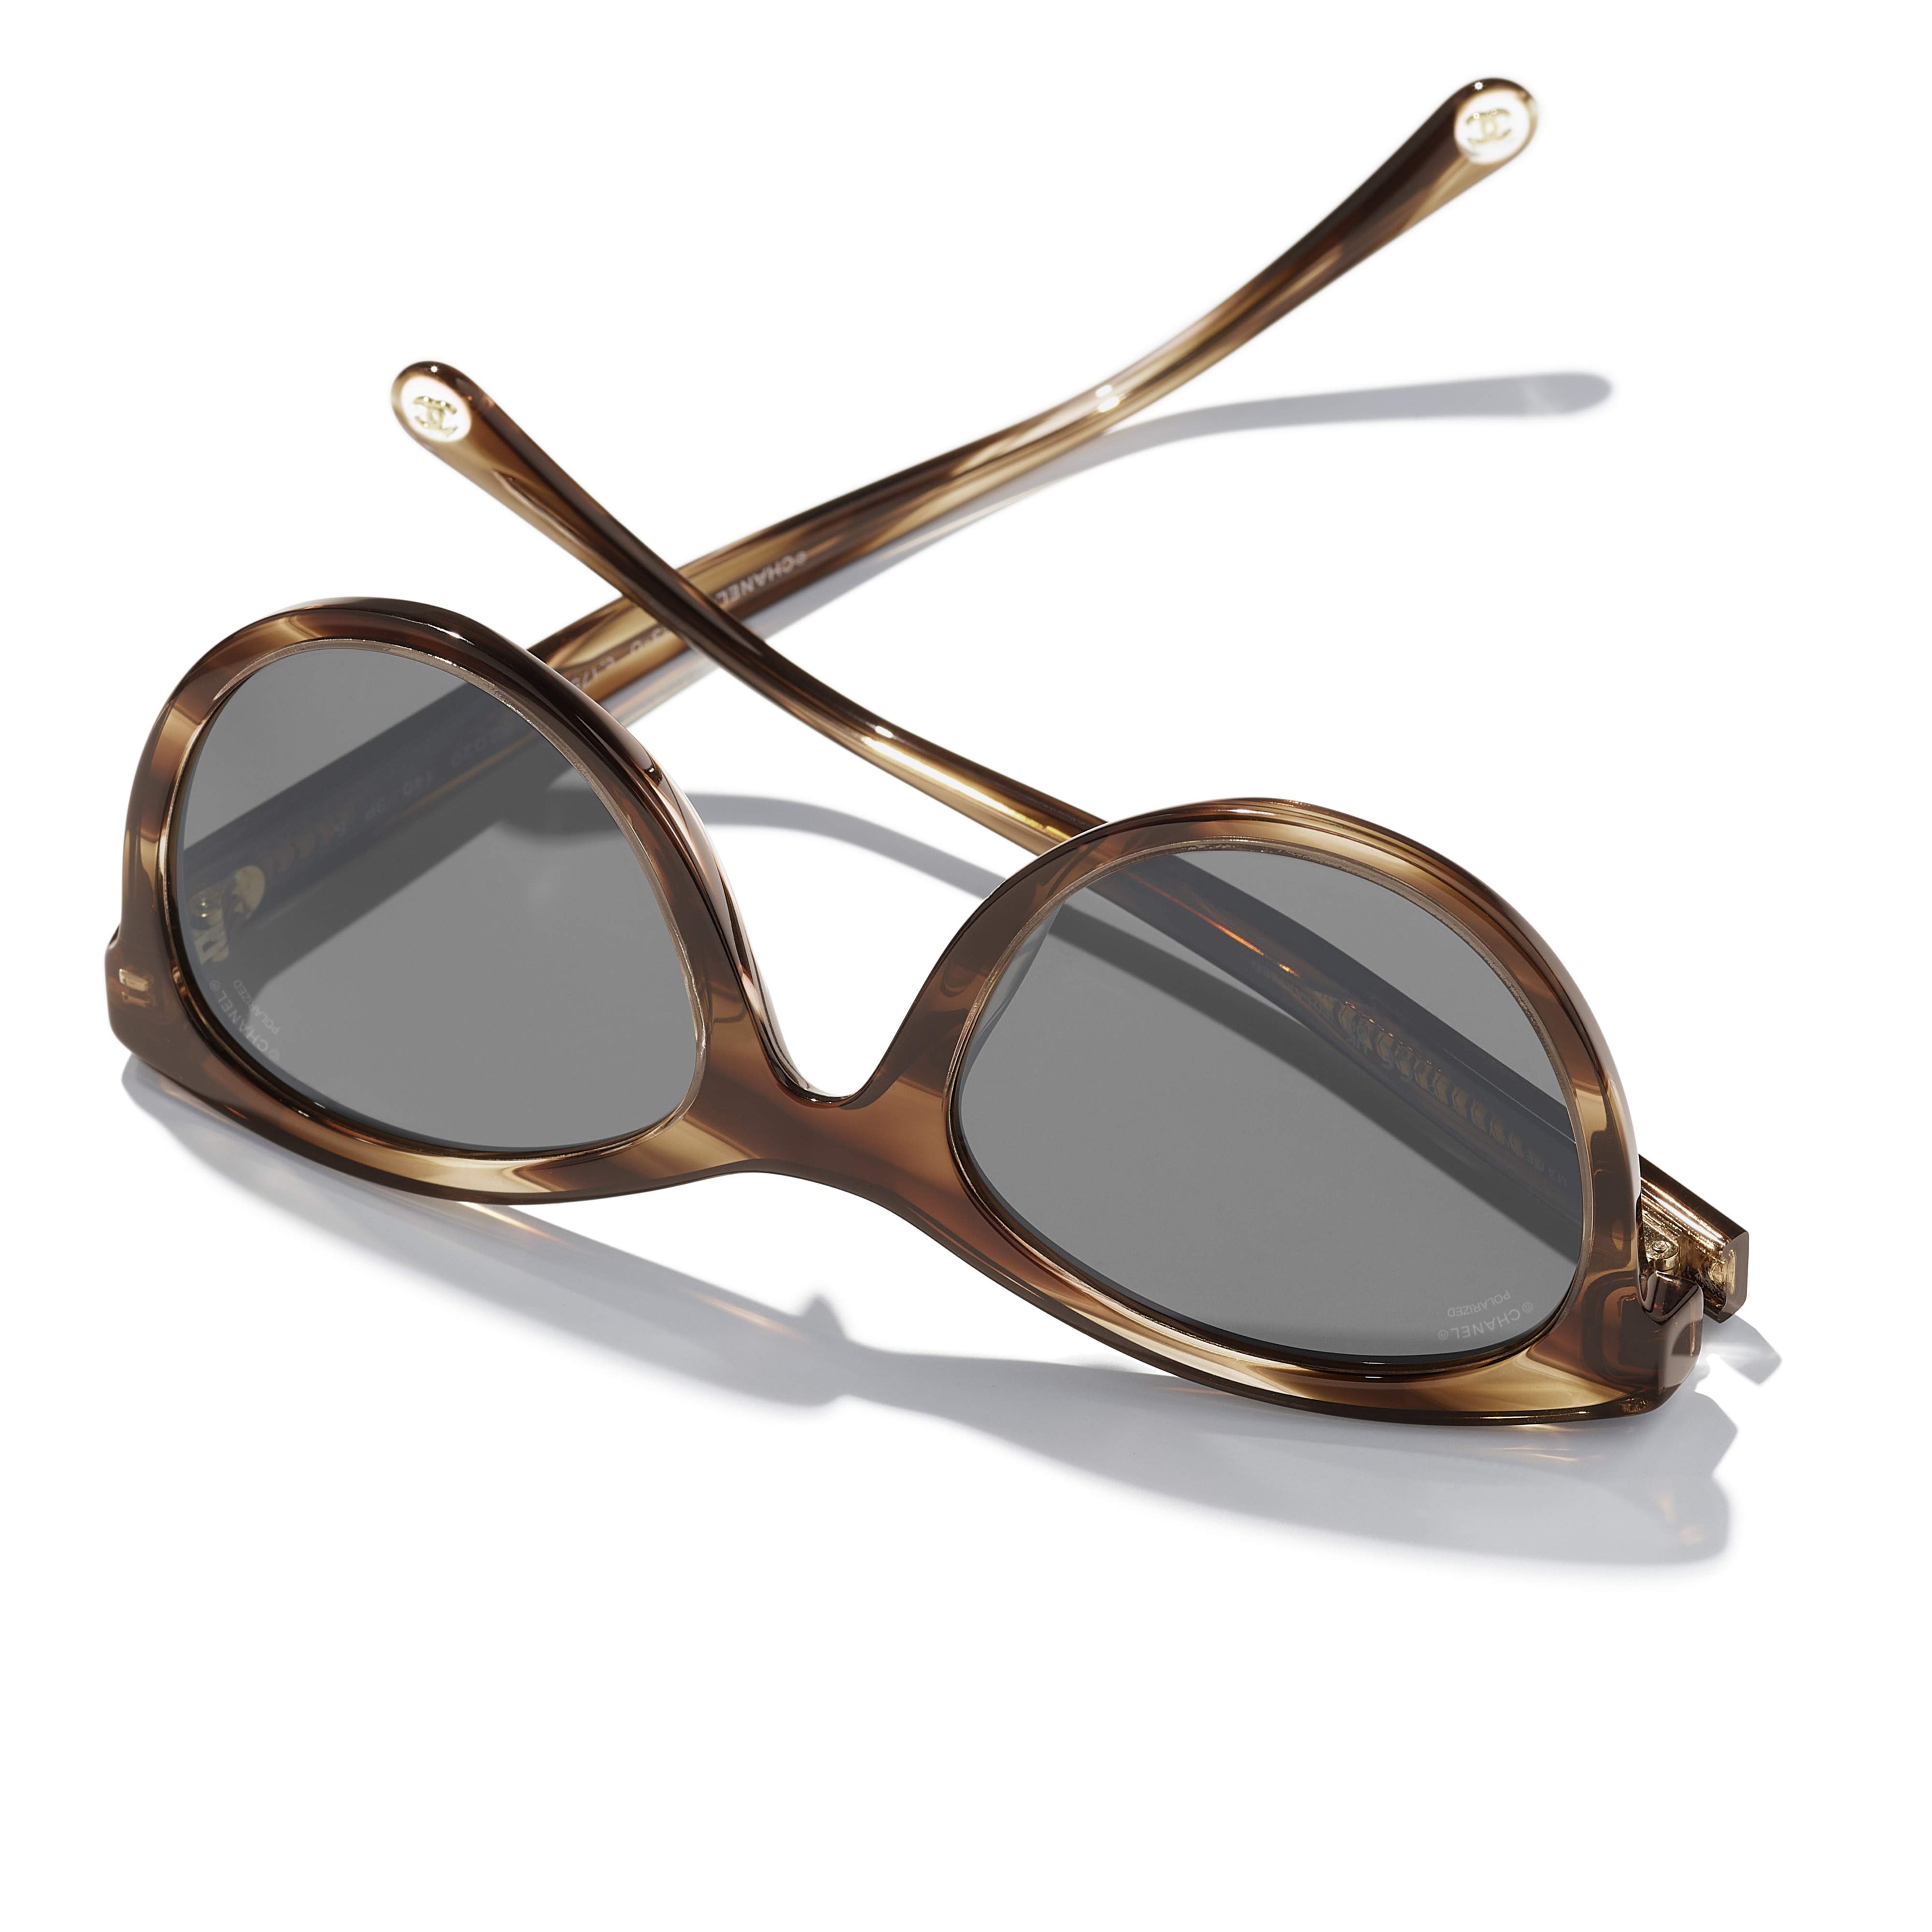 Sunglasses CHANEL CH5523U 1757/48 52-20 Brown Stripped in stock 